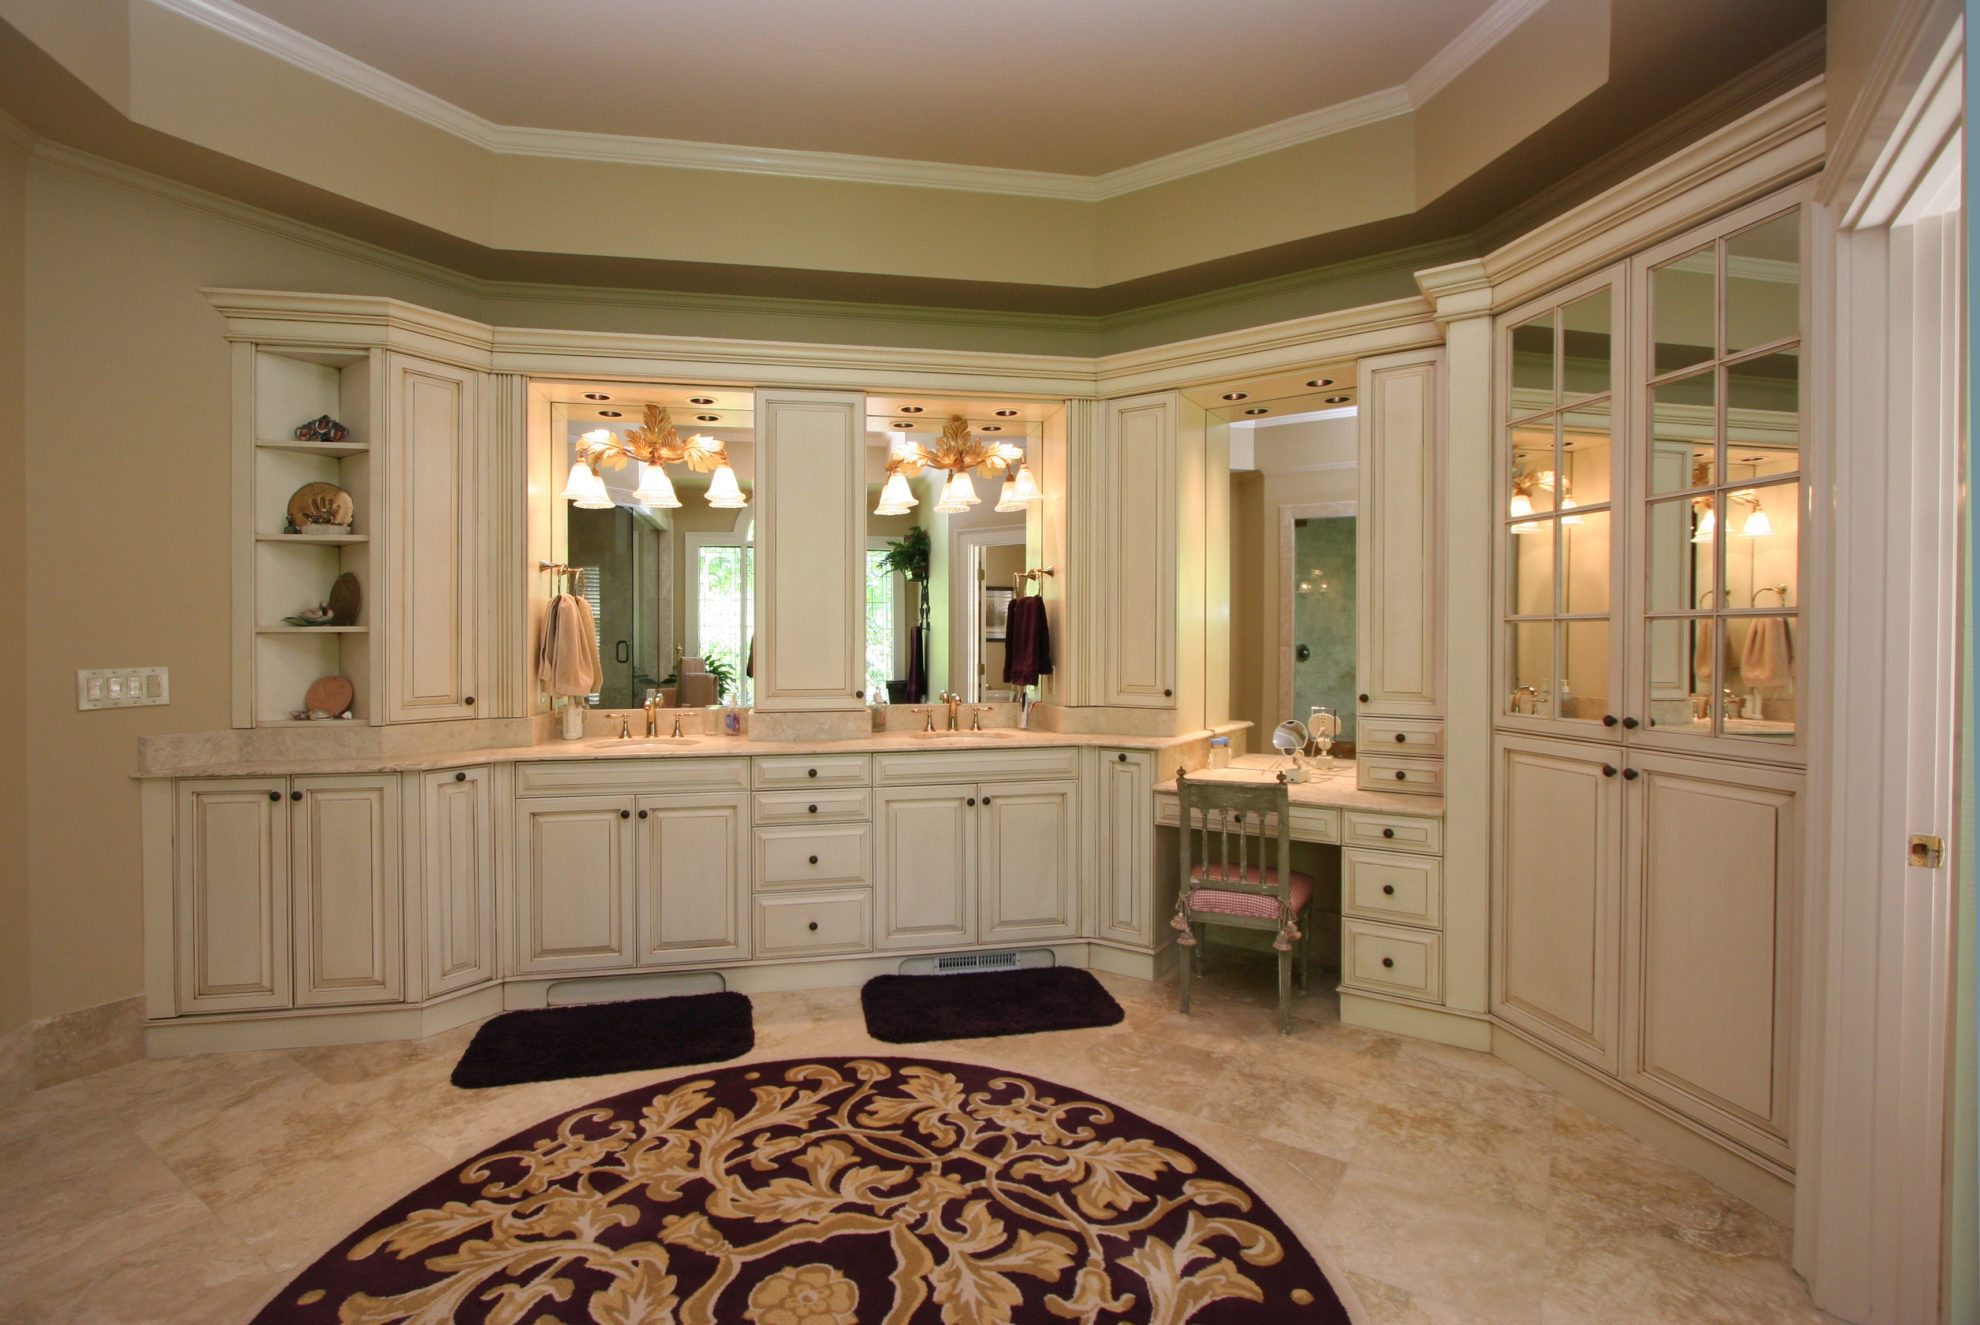 A Fancy White Bathroom With Makeup Vanity